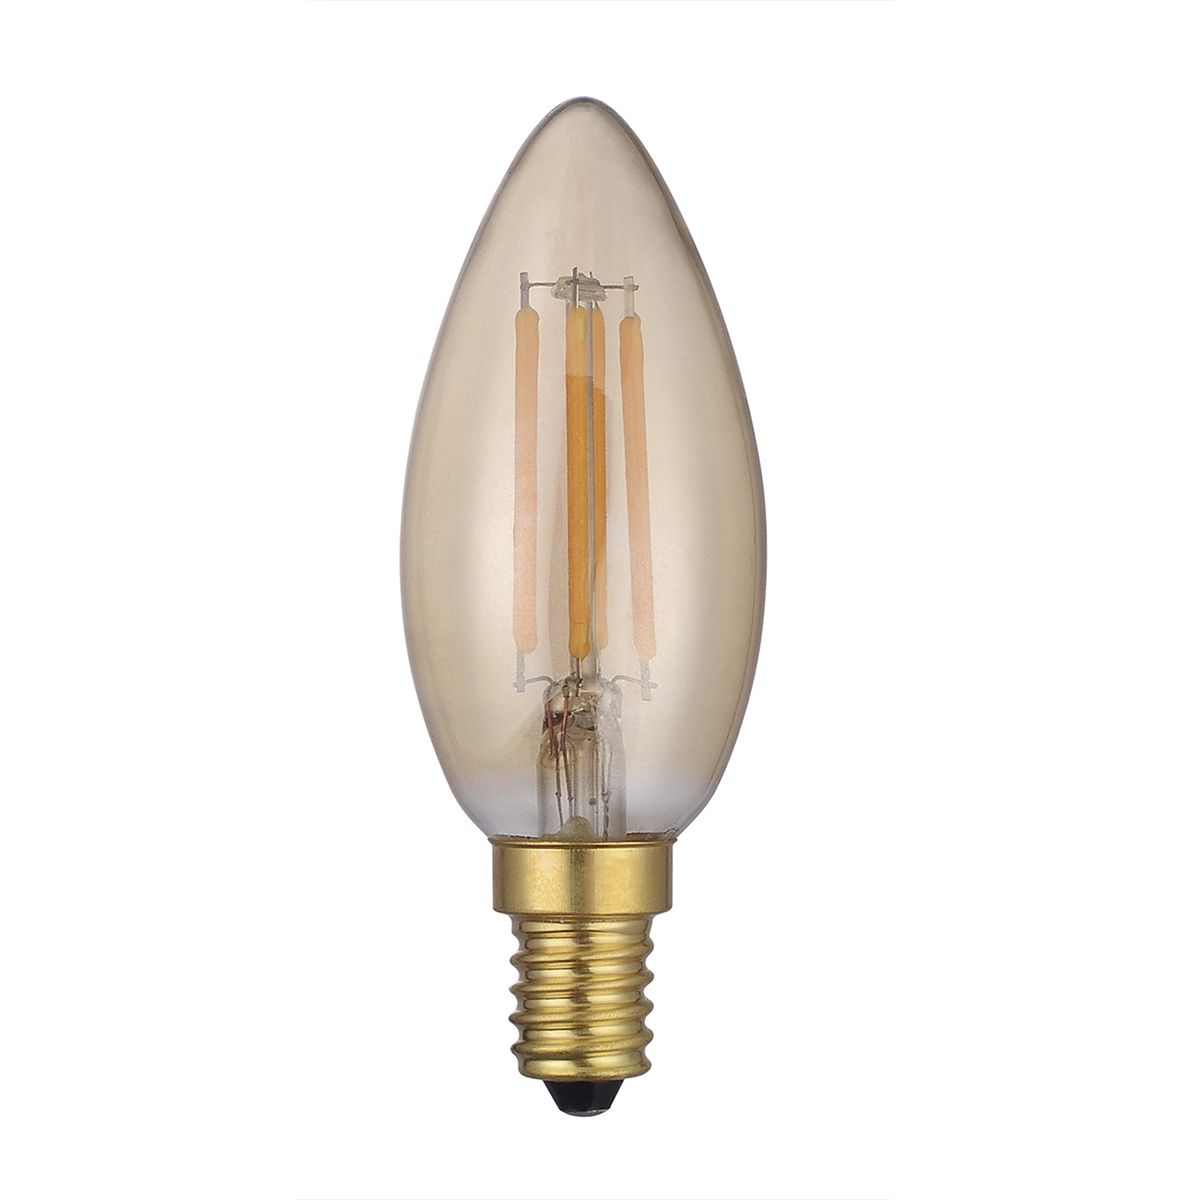 5 Pack Vintage Candle LED Bulb Dimmable E14 4w